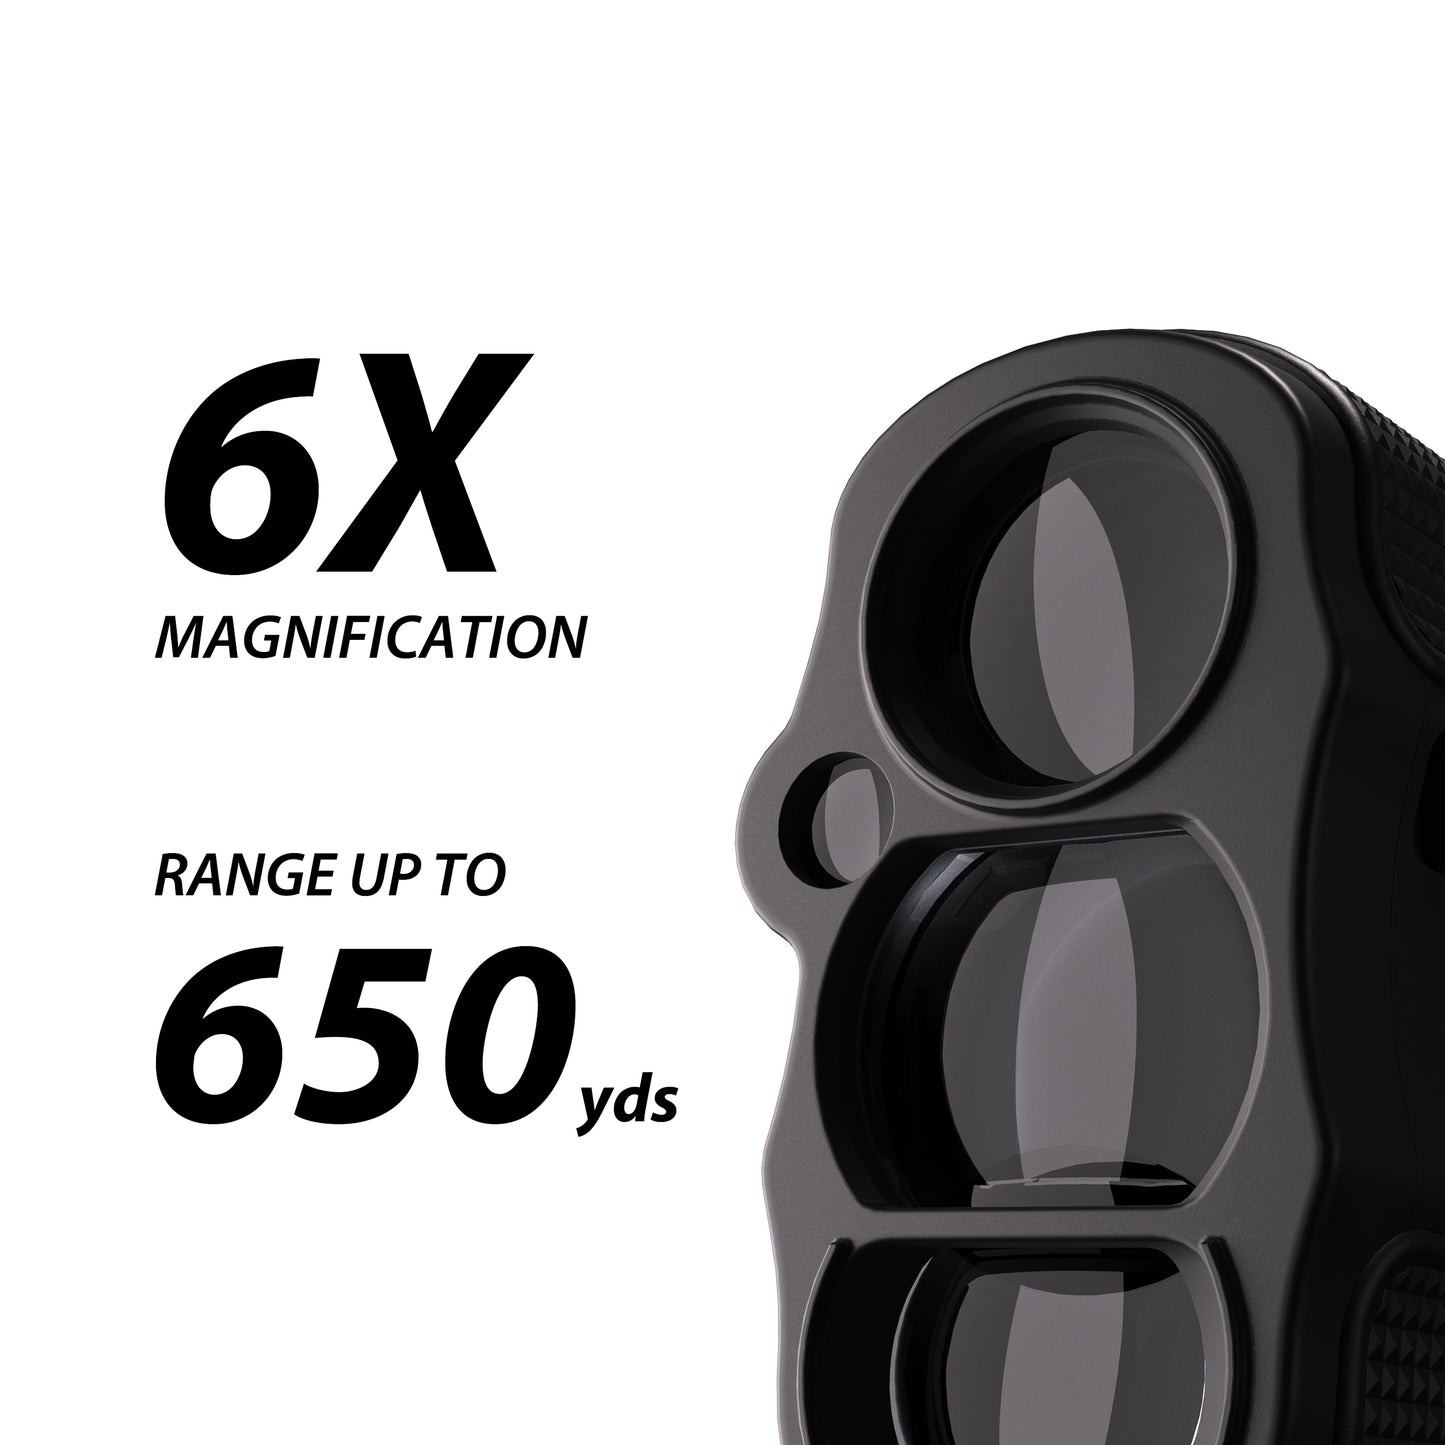 Gogogo Sport Vpro Golf Hunting Range Finder Gift Distance Measuring with High-Precision Flag Pole Locking Vibration Function | GS52  650Y